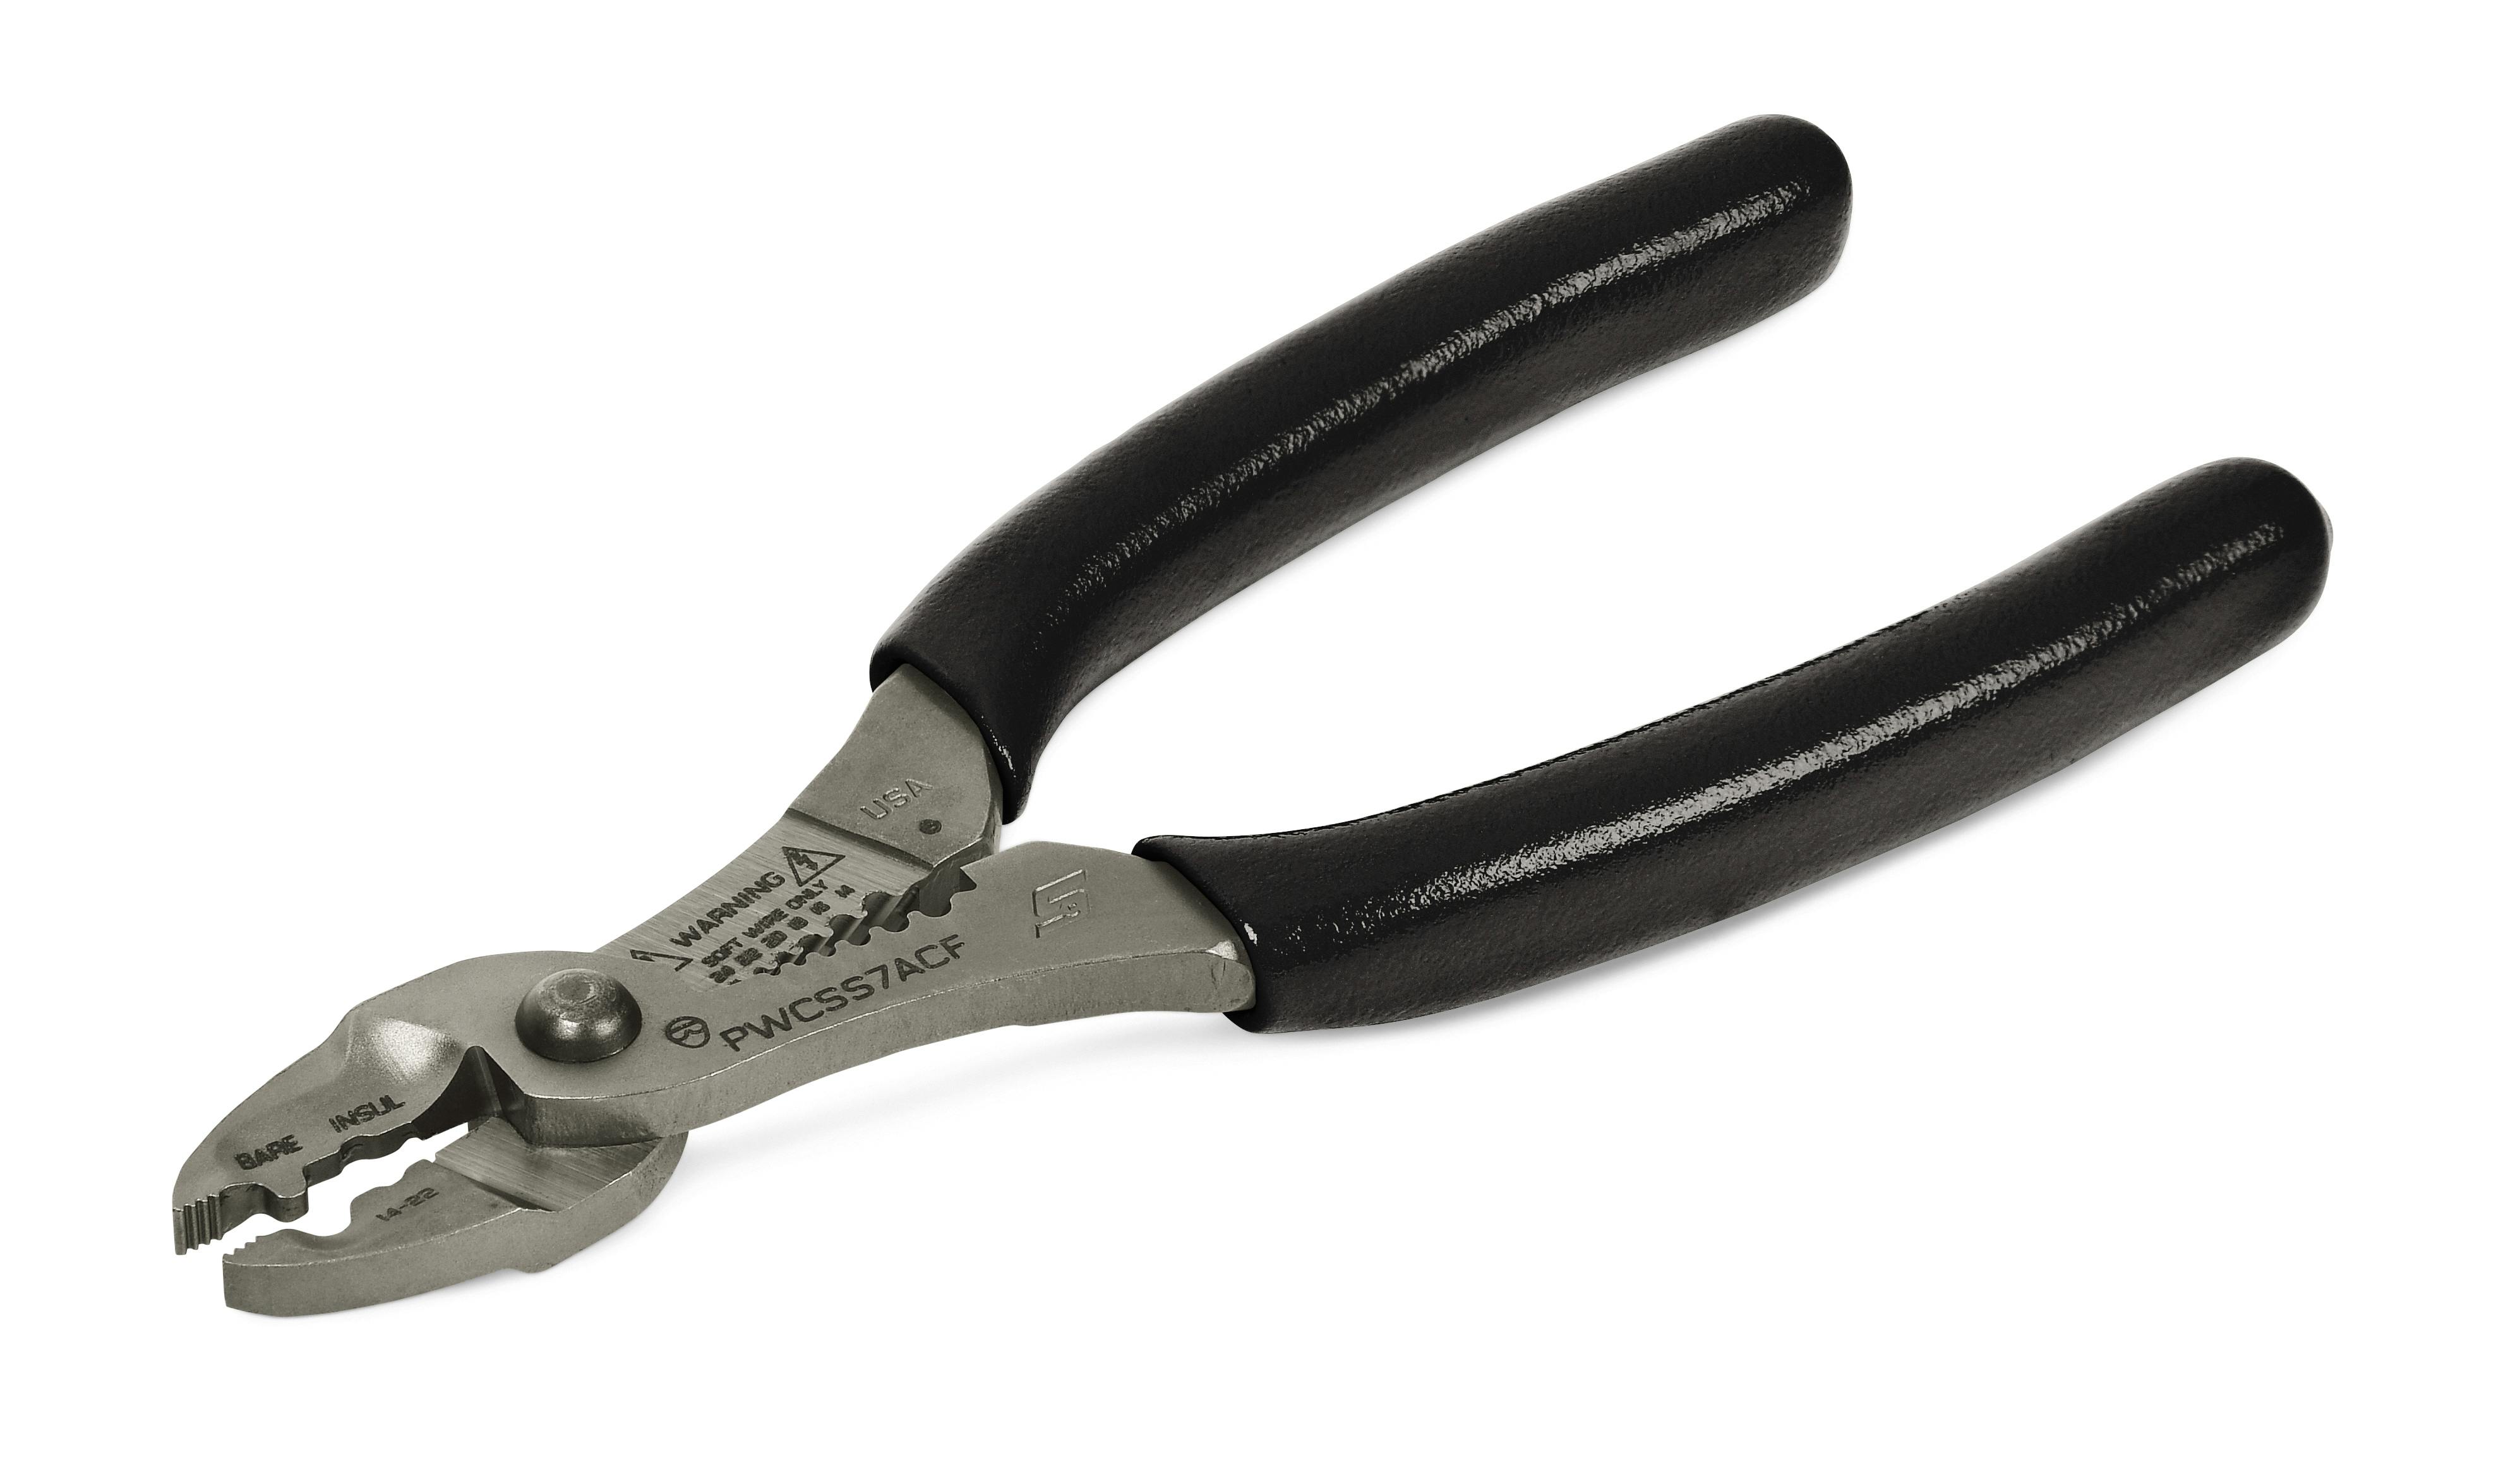 Details about   *NEW* Snap On PWCS7ACF BLACK Handle Stripper And Crimper Pliers. Wire Cutter 